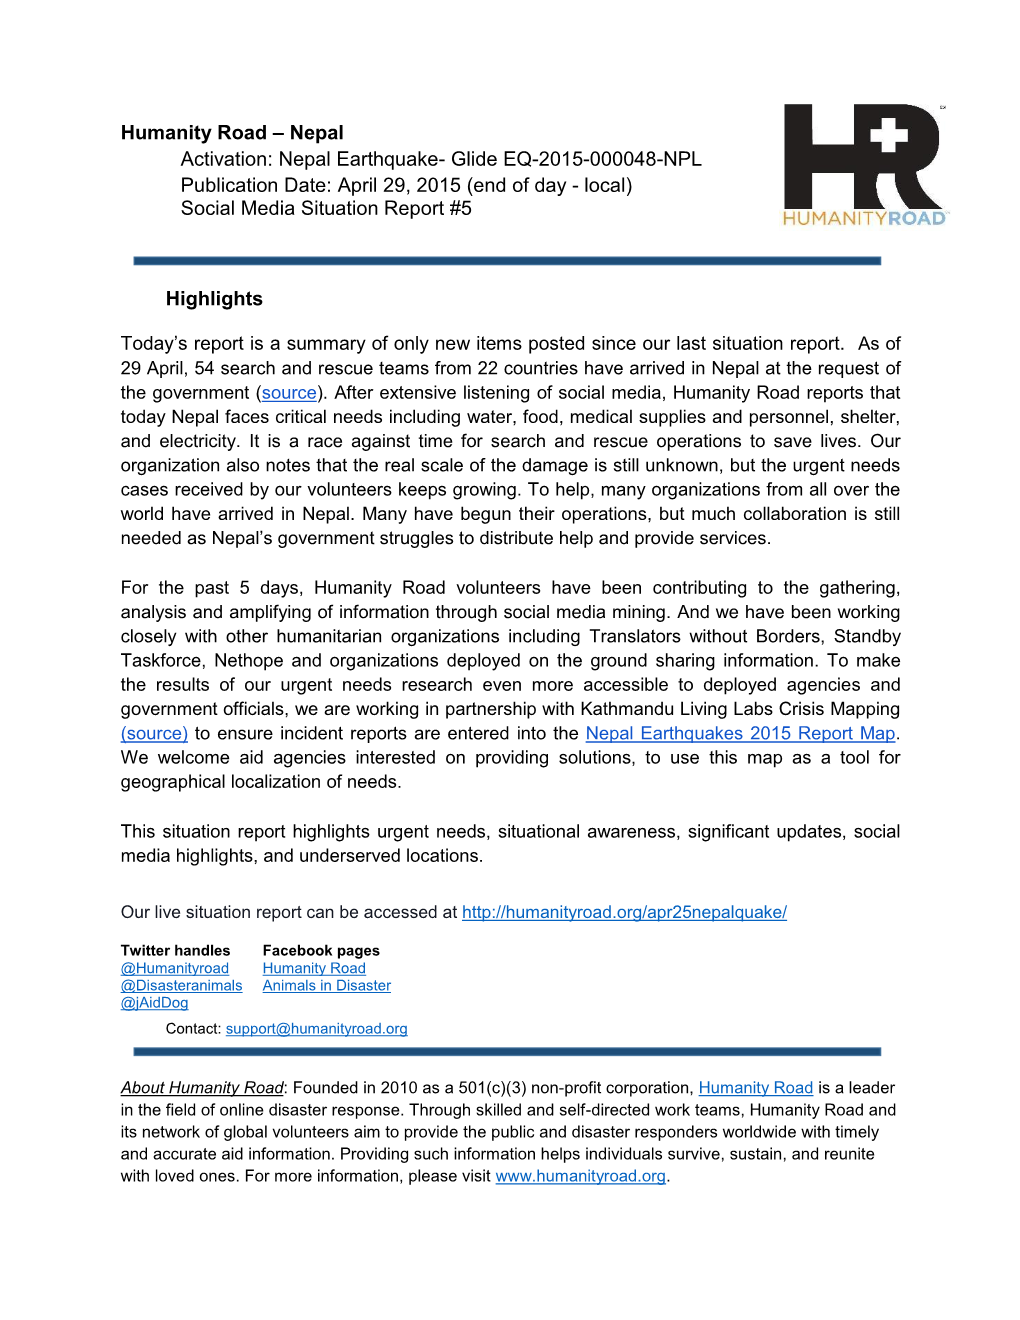 Humanity Road – Nepal Activation: Nepal Earthquake- Glide EQ-2015-000048-NPL Publication Date: April 29, 2015 (End of Day - Local) Social Media Situation Report #5